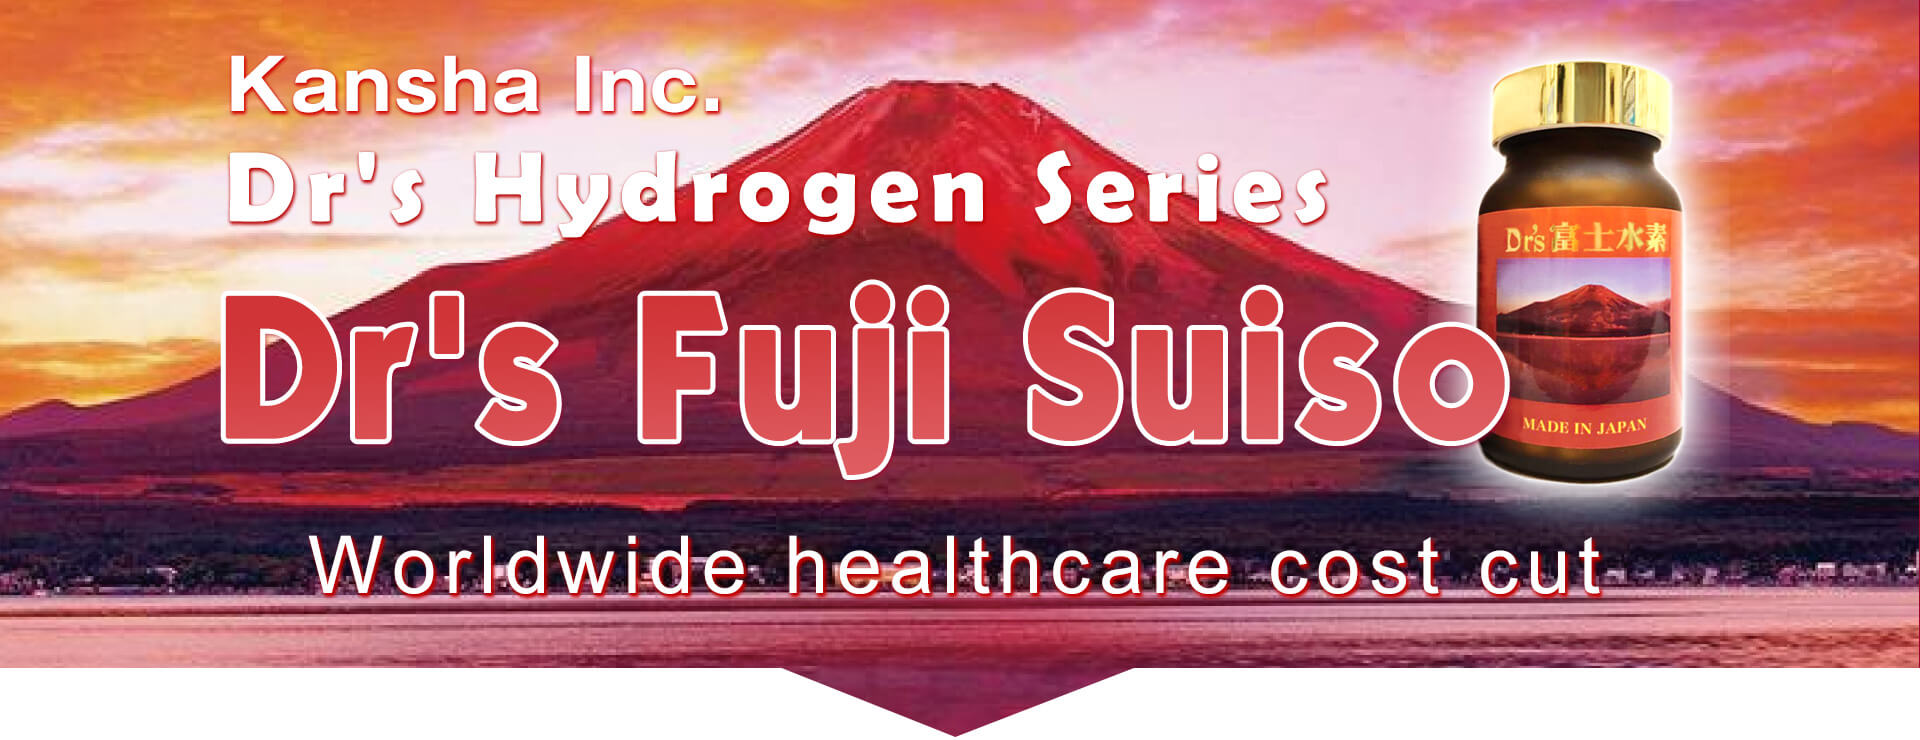 Dr's Fuji Suiso. Worldwide healthcare cost cut. ONE FOR ALL, ALL 